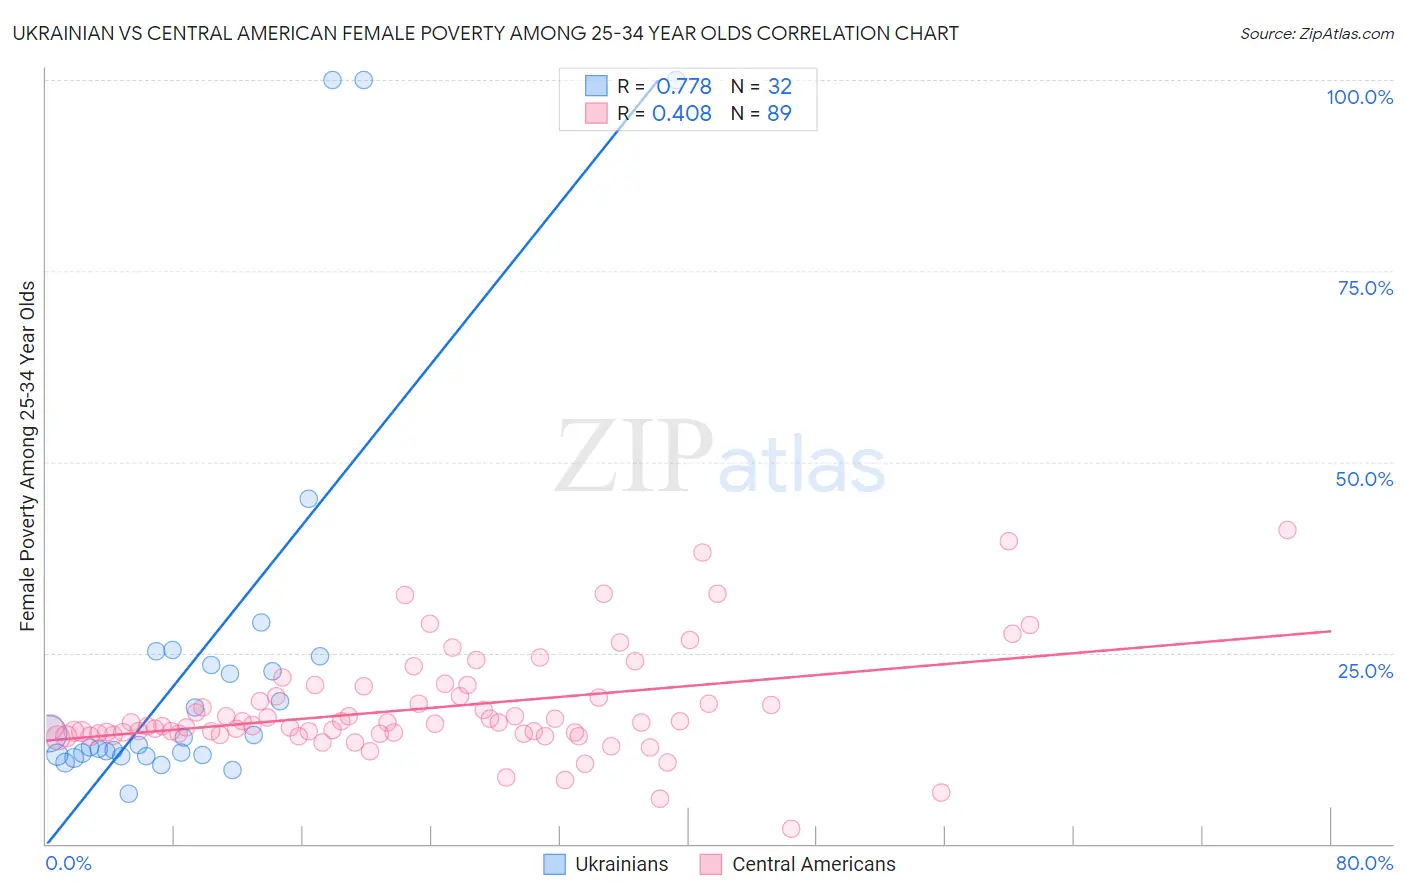 Ukrainian vs Central American Female Poverty Among 25-34 Year Olds